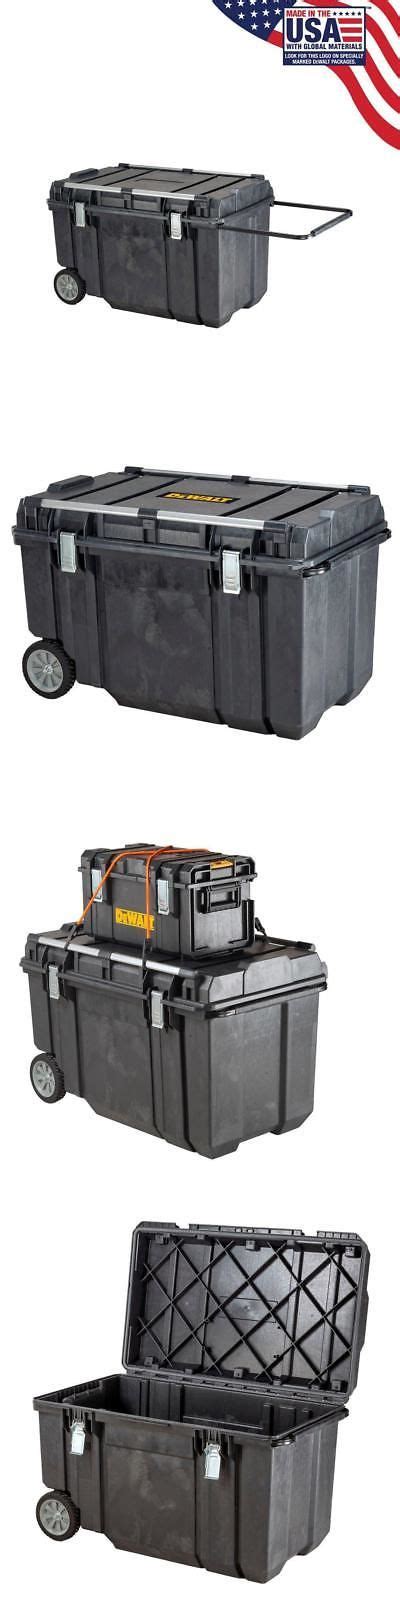 Tool Boxes 33089 Dewalt Tough Chest 38 In 63 Gal Mobile Tool Box